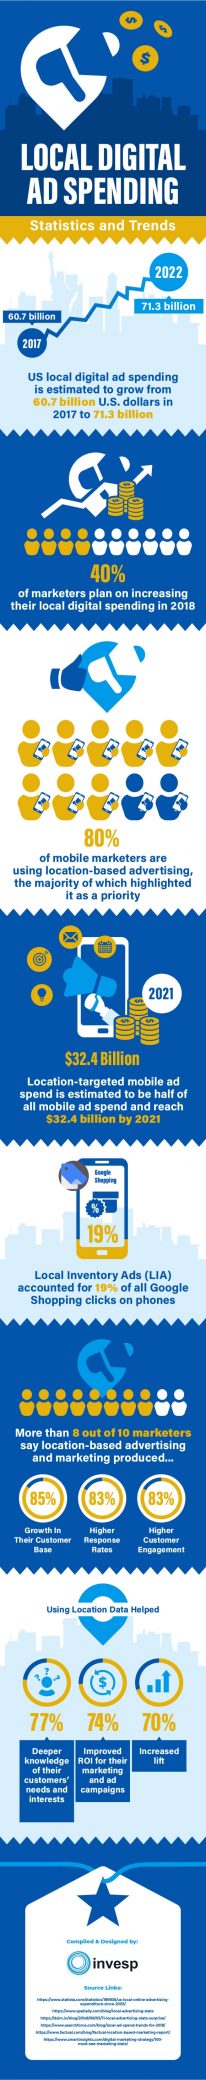 Local Digital Ad Spend Expected to Sour [Infographic]